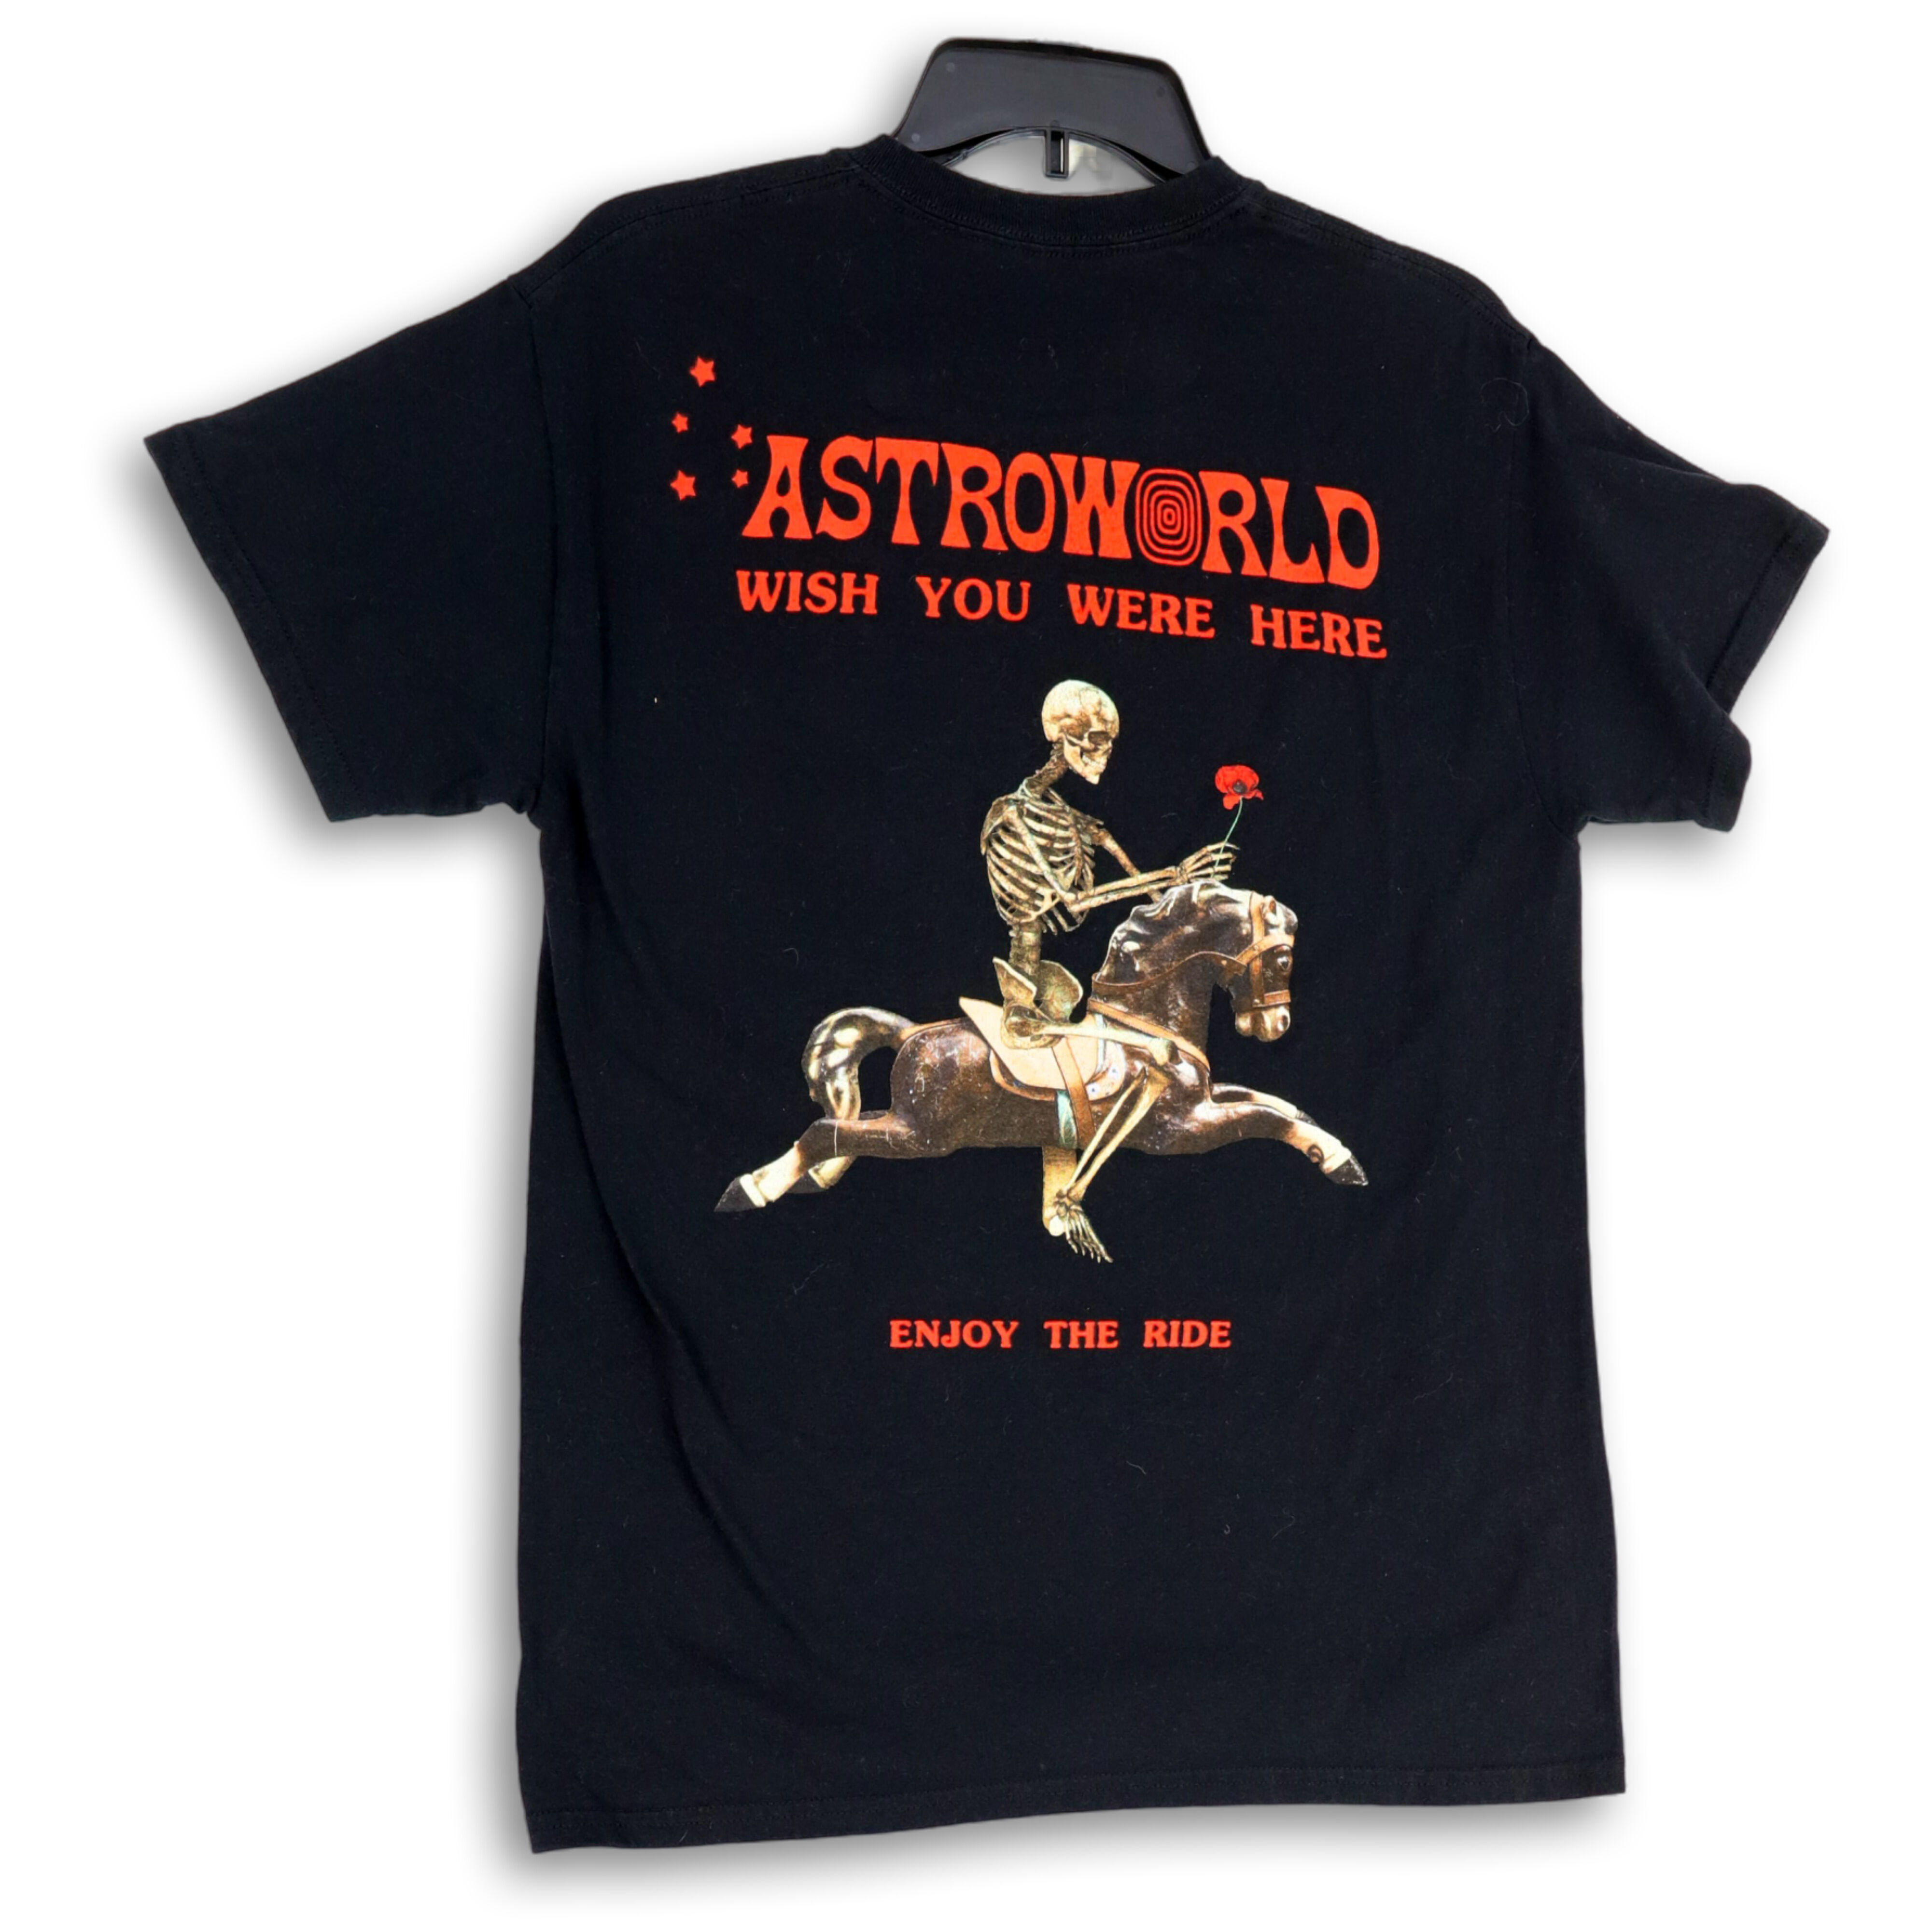 Buy the Womens Black Short Sleeve Crew Neck Pullover Astroworld T